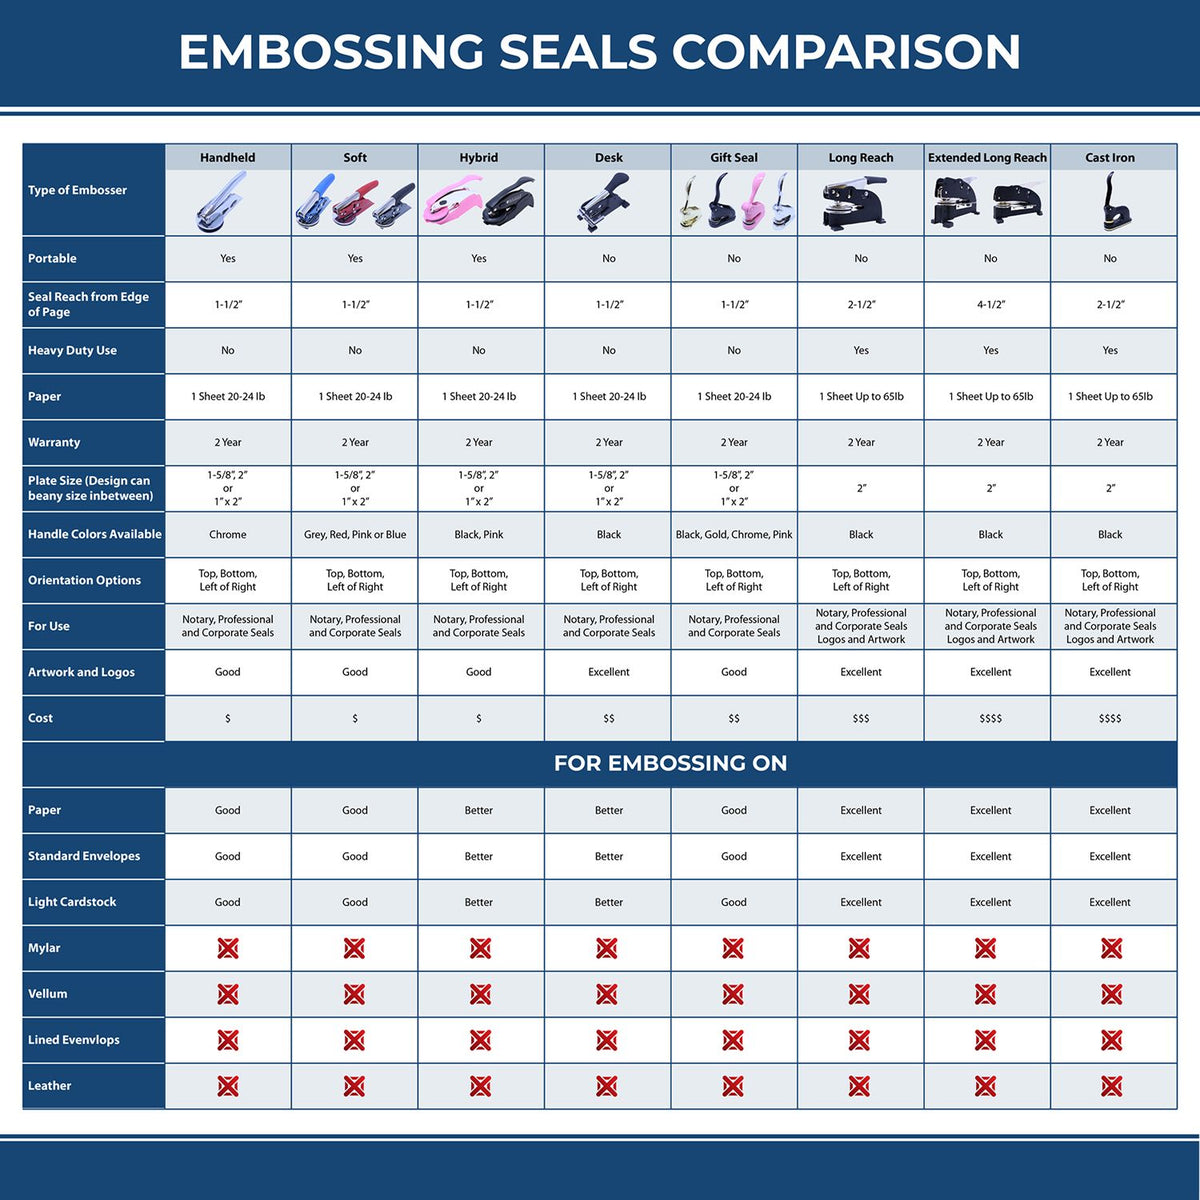 A comparison chart for the different types of mount models available for the Handheld Hawaii Land Surveyor Seal.